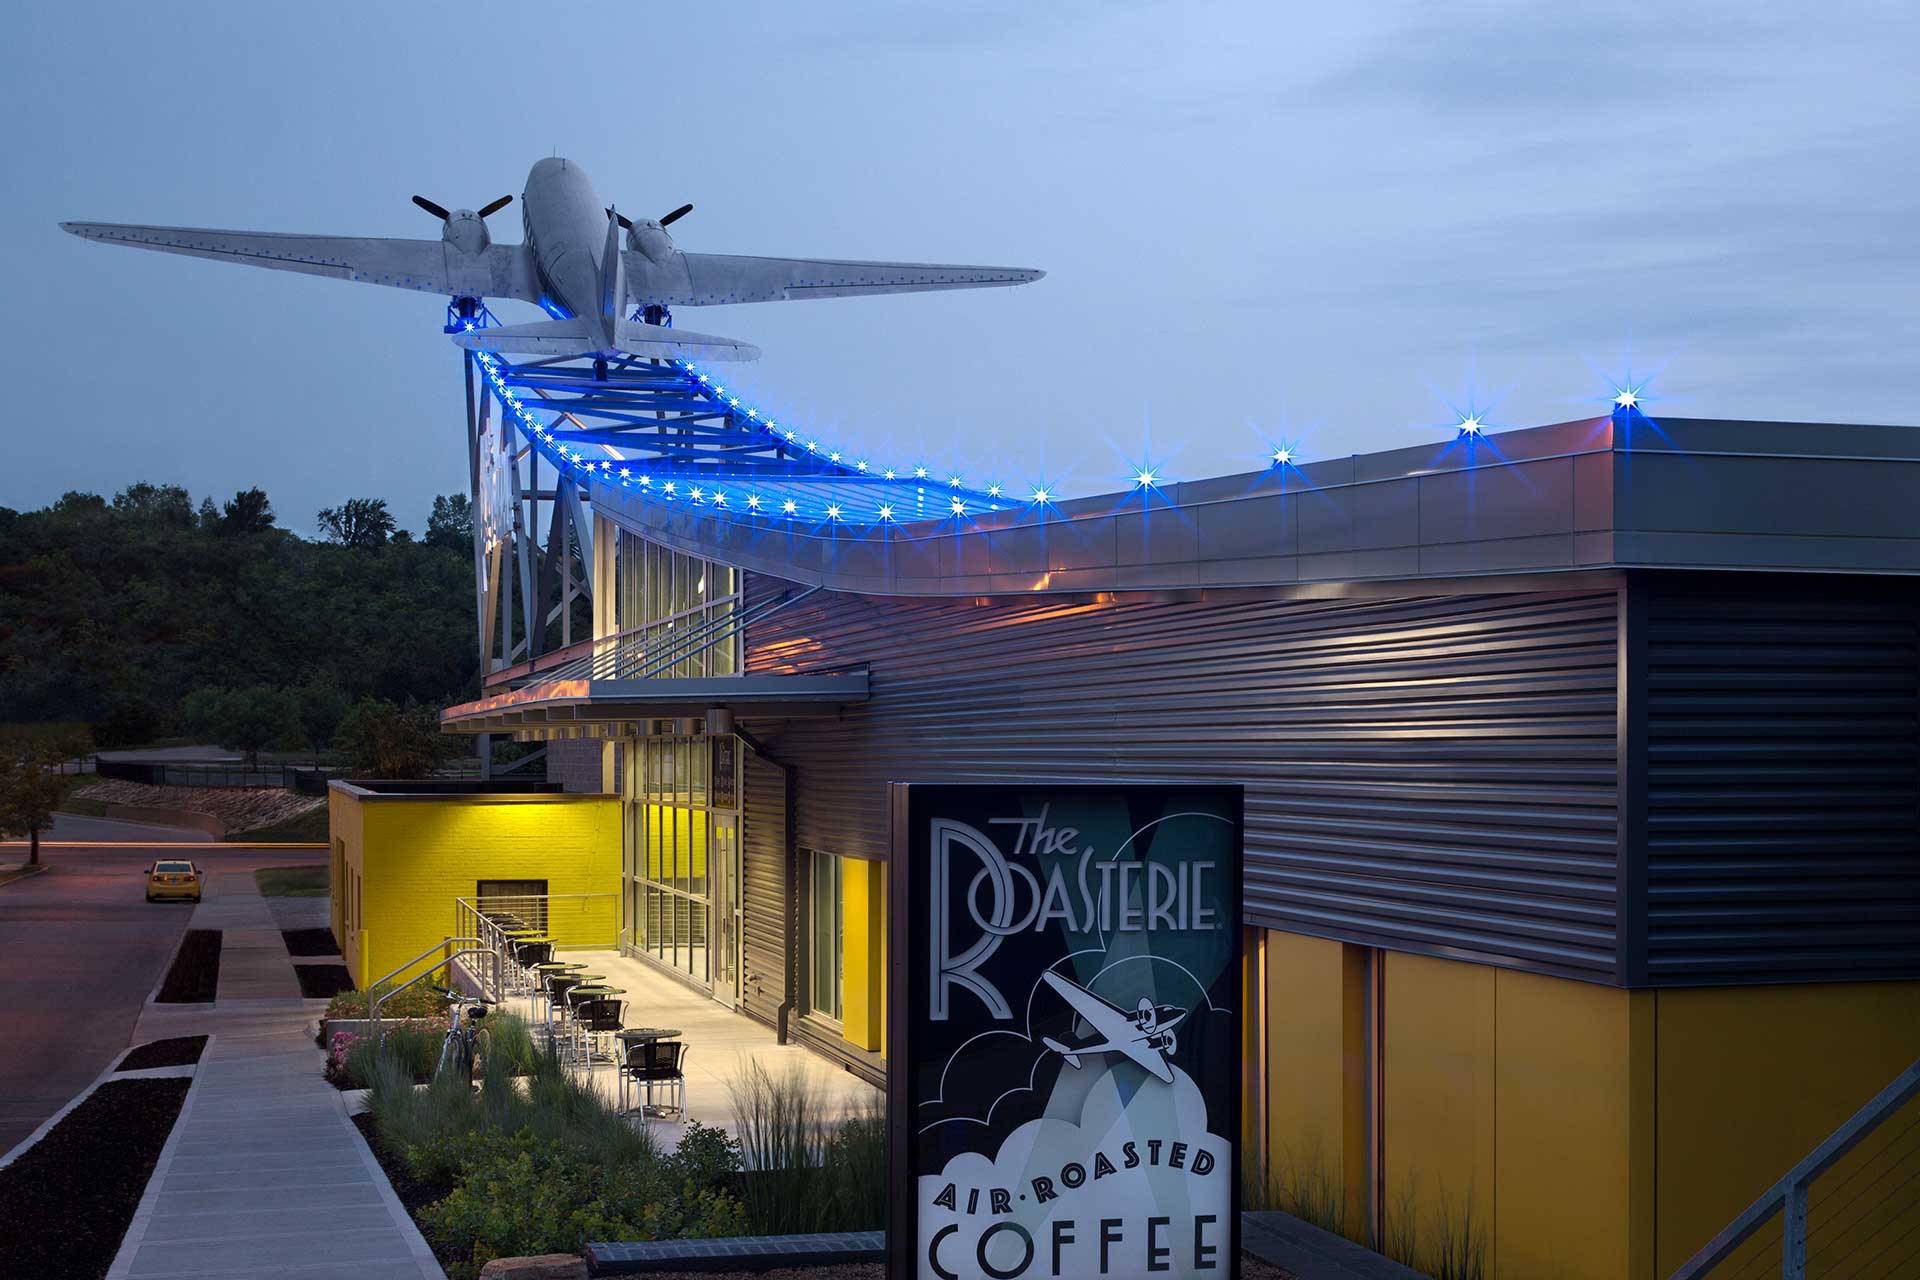 The Roasterie Kansas City factory, with twin-propeller aeroplane built into design of roof